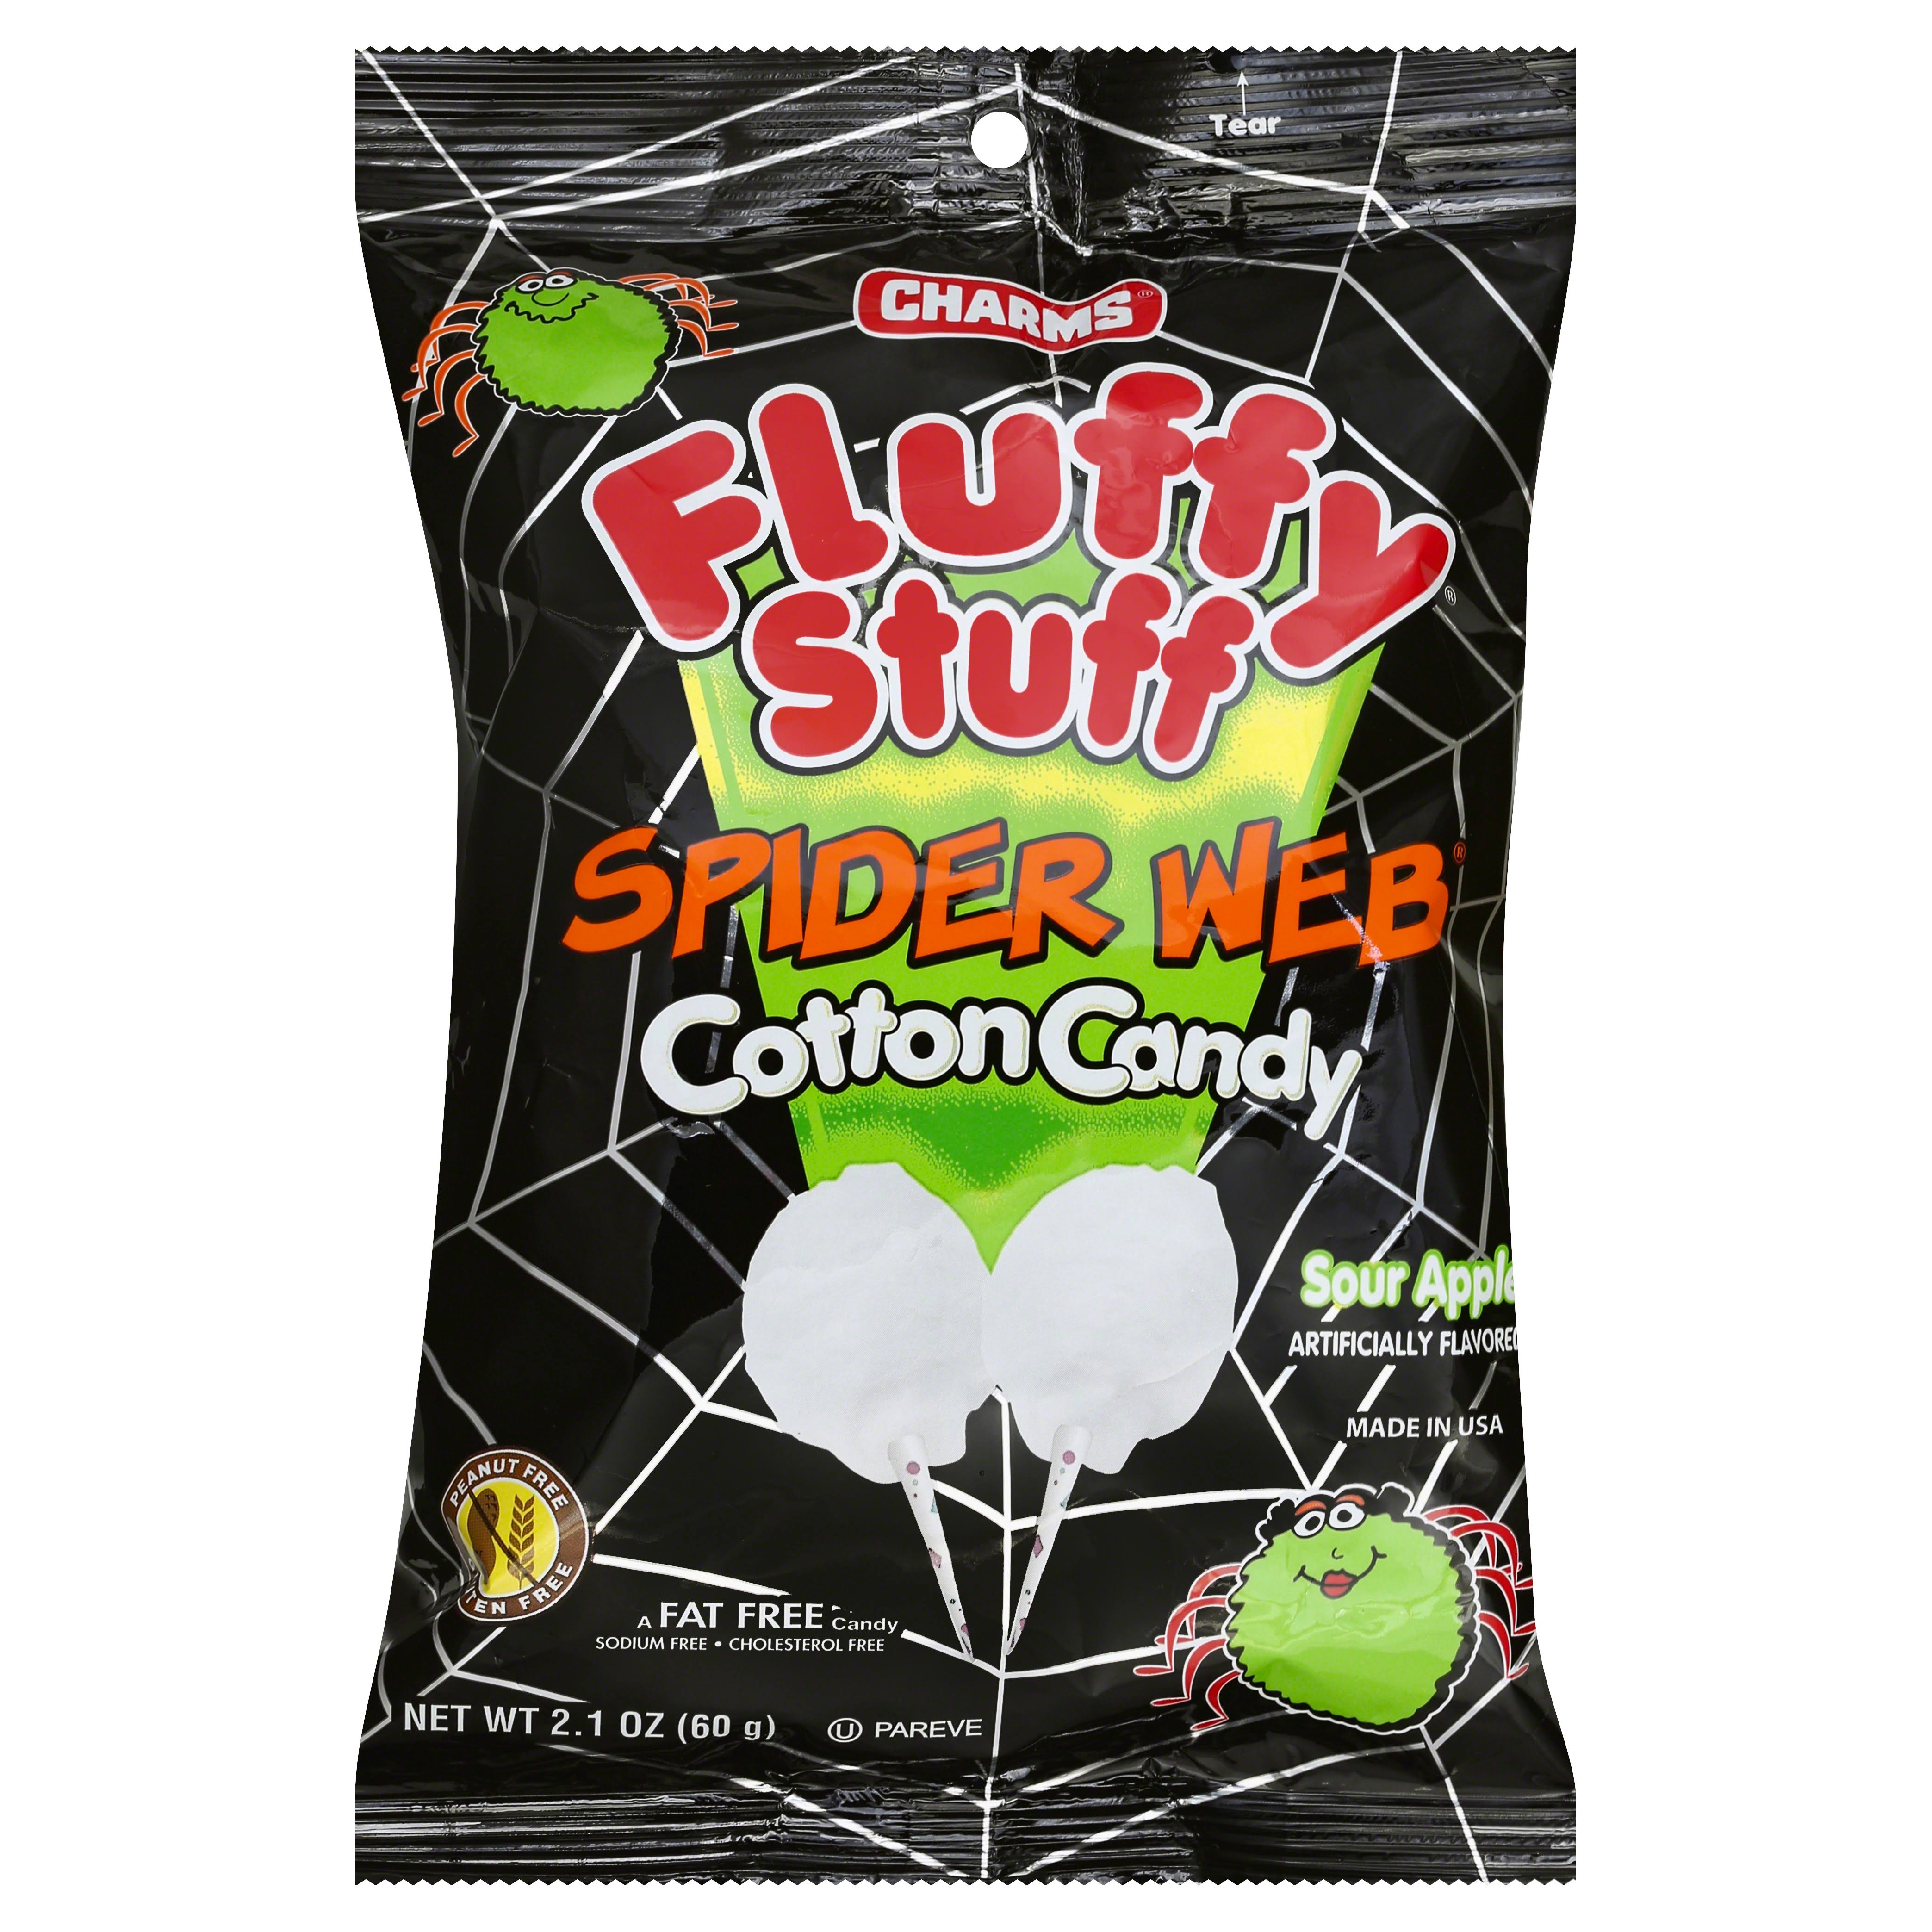 Charms Fluffy Stuff Spider Web Halloween Cotton Candy Sour Apple - 2.1oz, 2pk